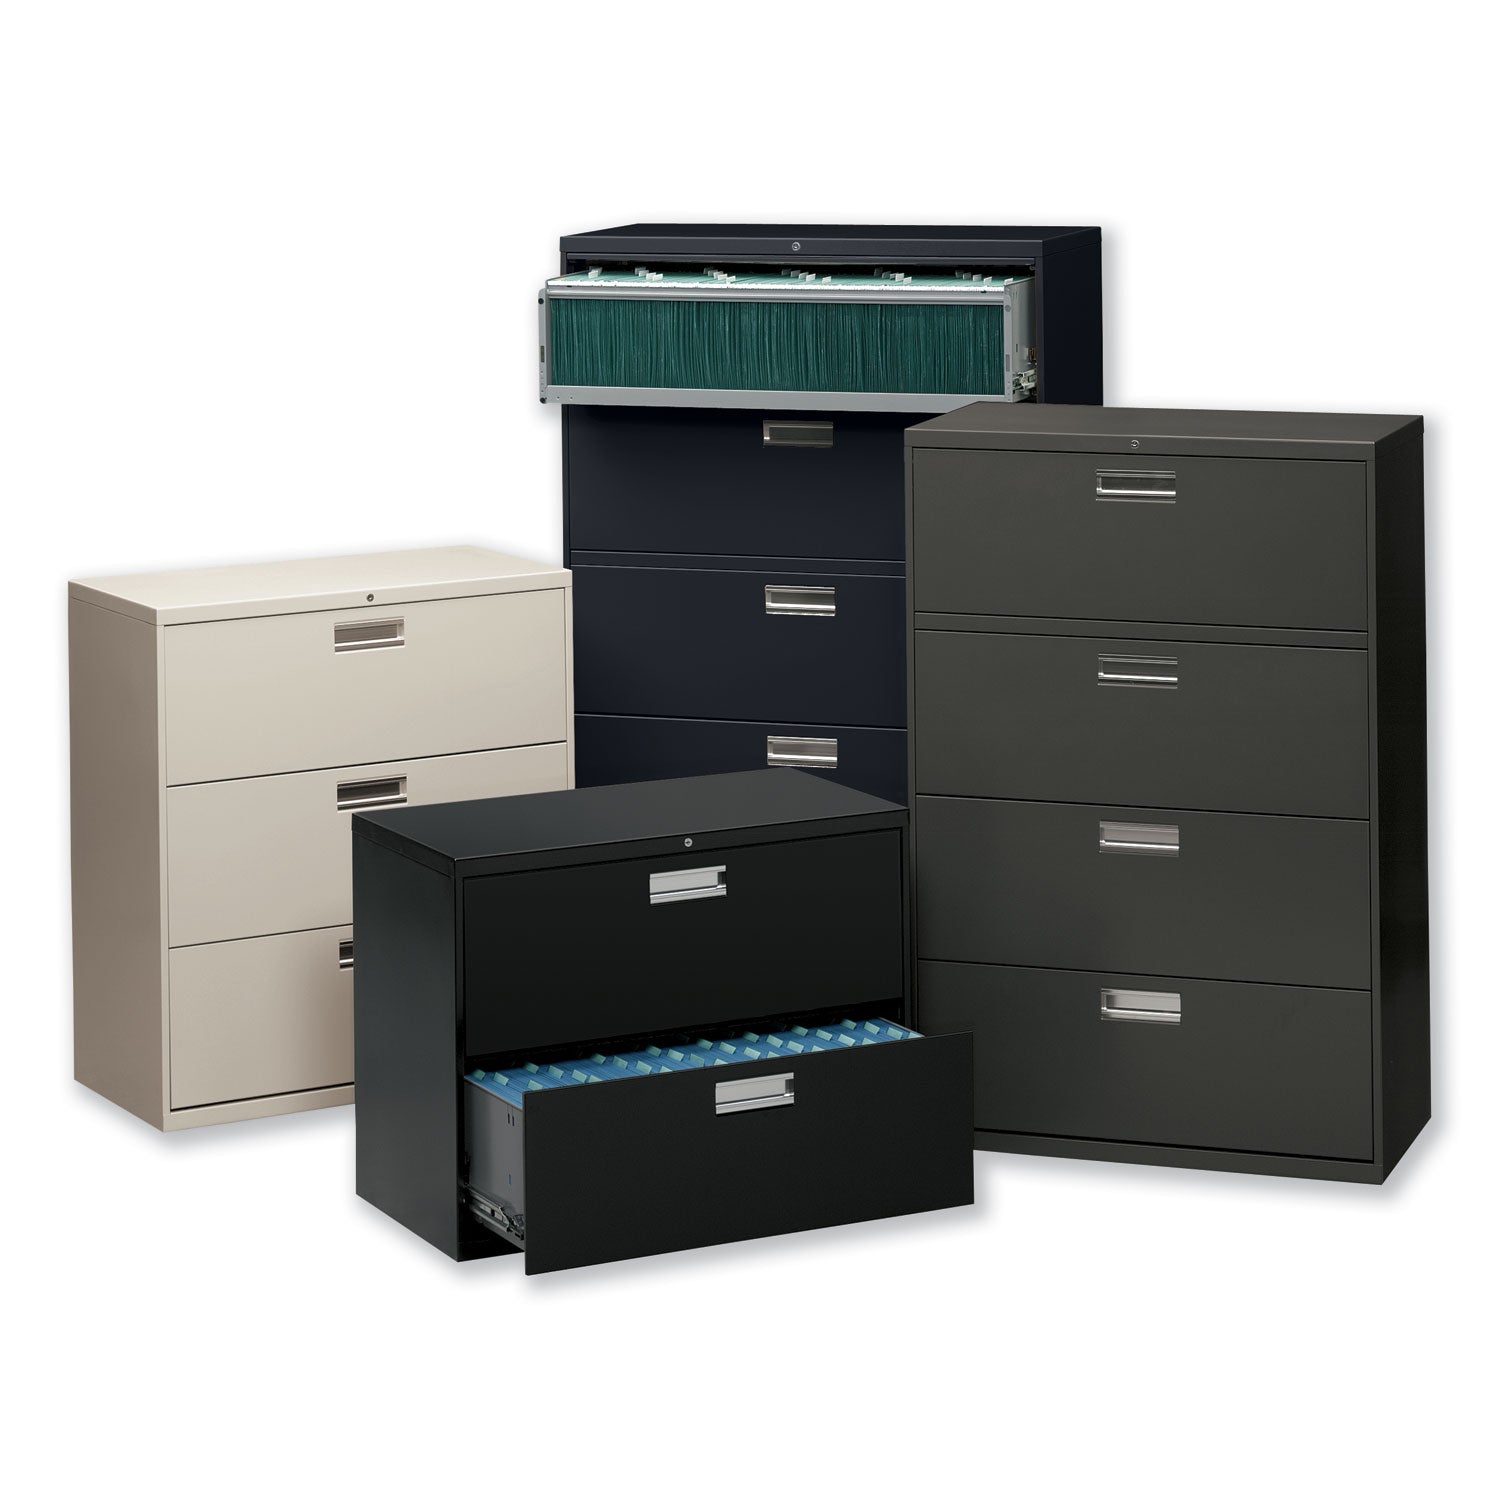 Brigade 600 Series Lateral File, 2 Legal/Letter-Size File Drawers, Black, 36" x 18" x 28 - 